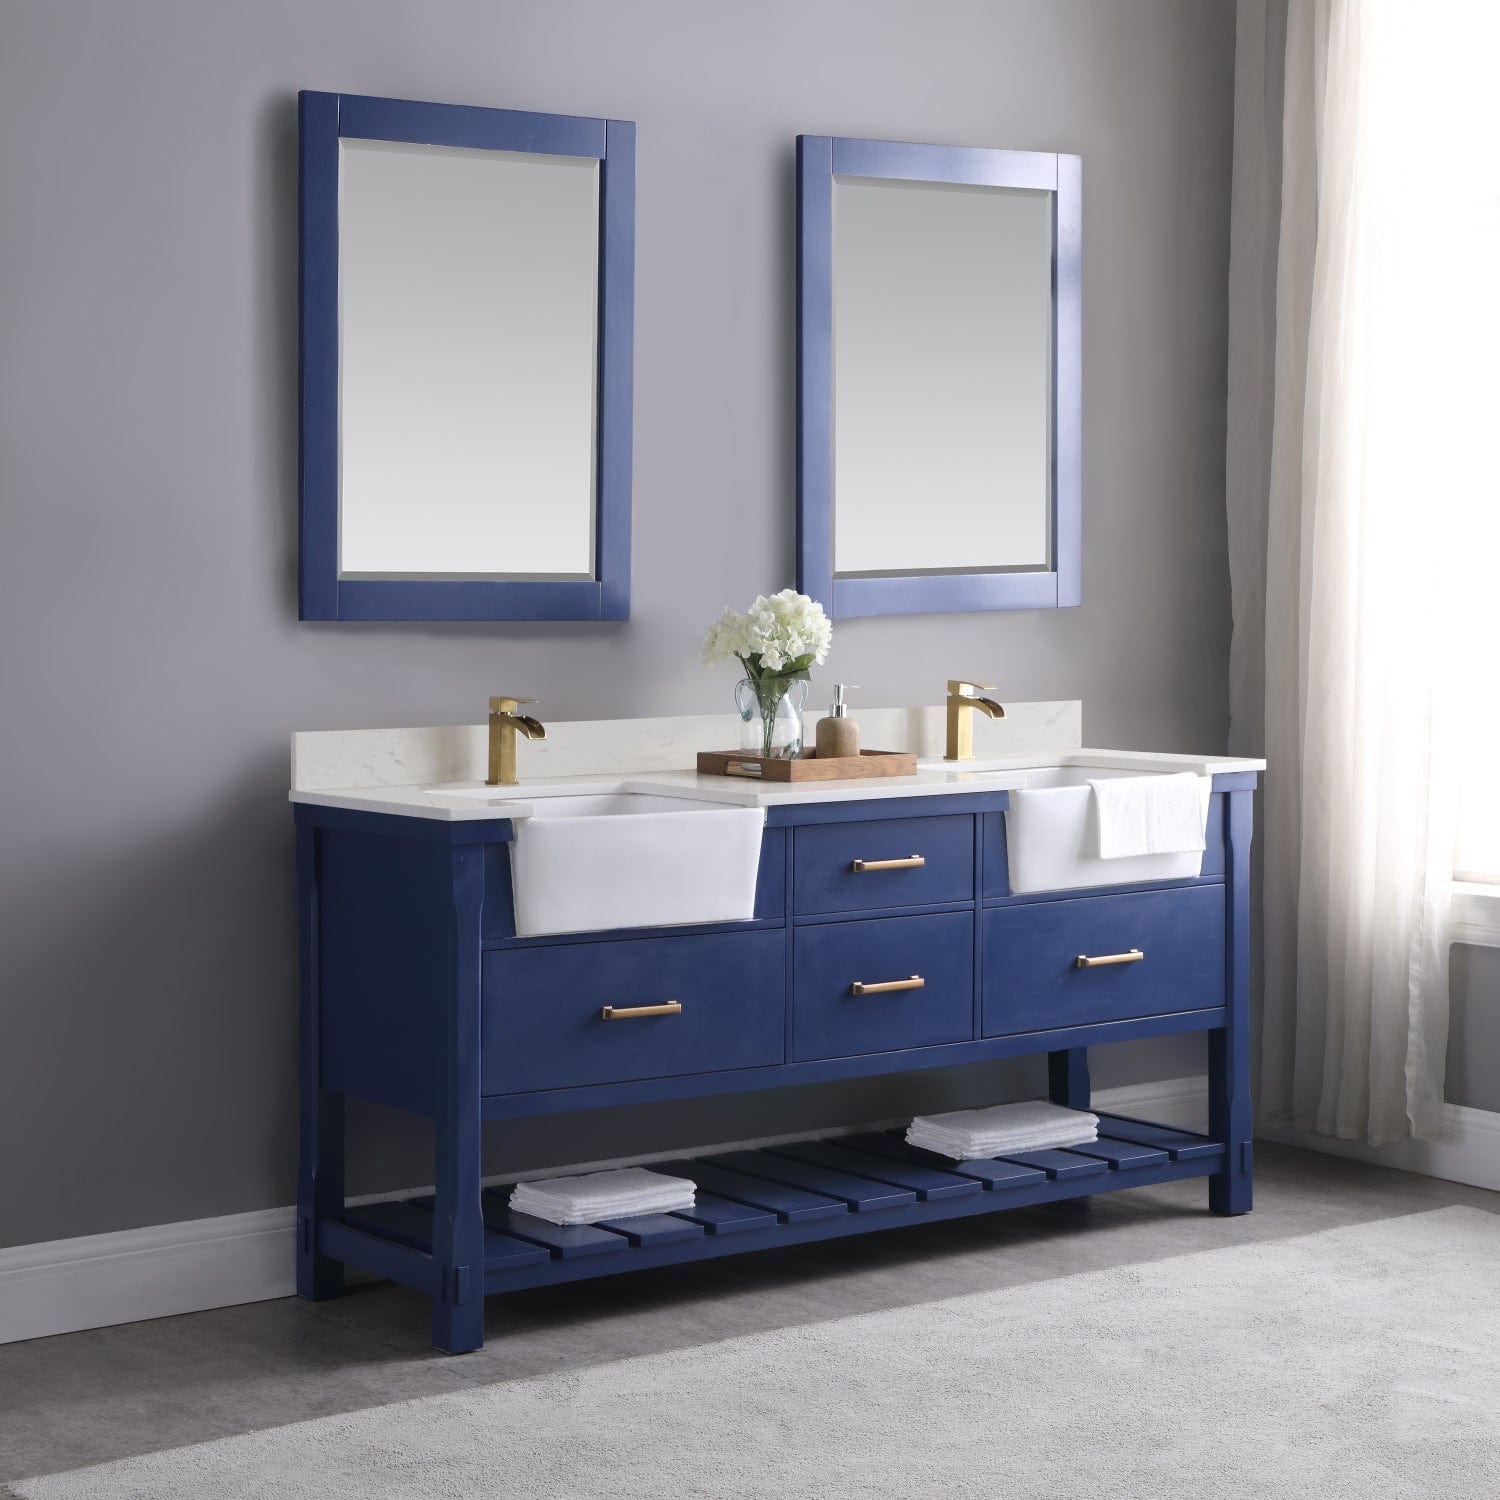 Altair Georgia 72" Double Bathroom Vanity Set in Jewelry Blue and Composite Carrara White Stone Top with White Farmhouse Basin with Mirror 537072-JB-AW - Molaix631112970679Vanity537072-JB-AW